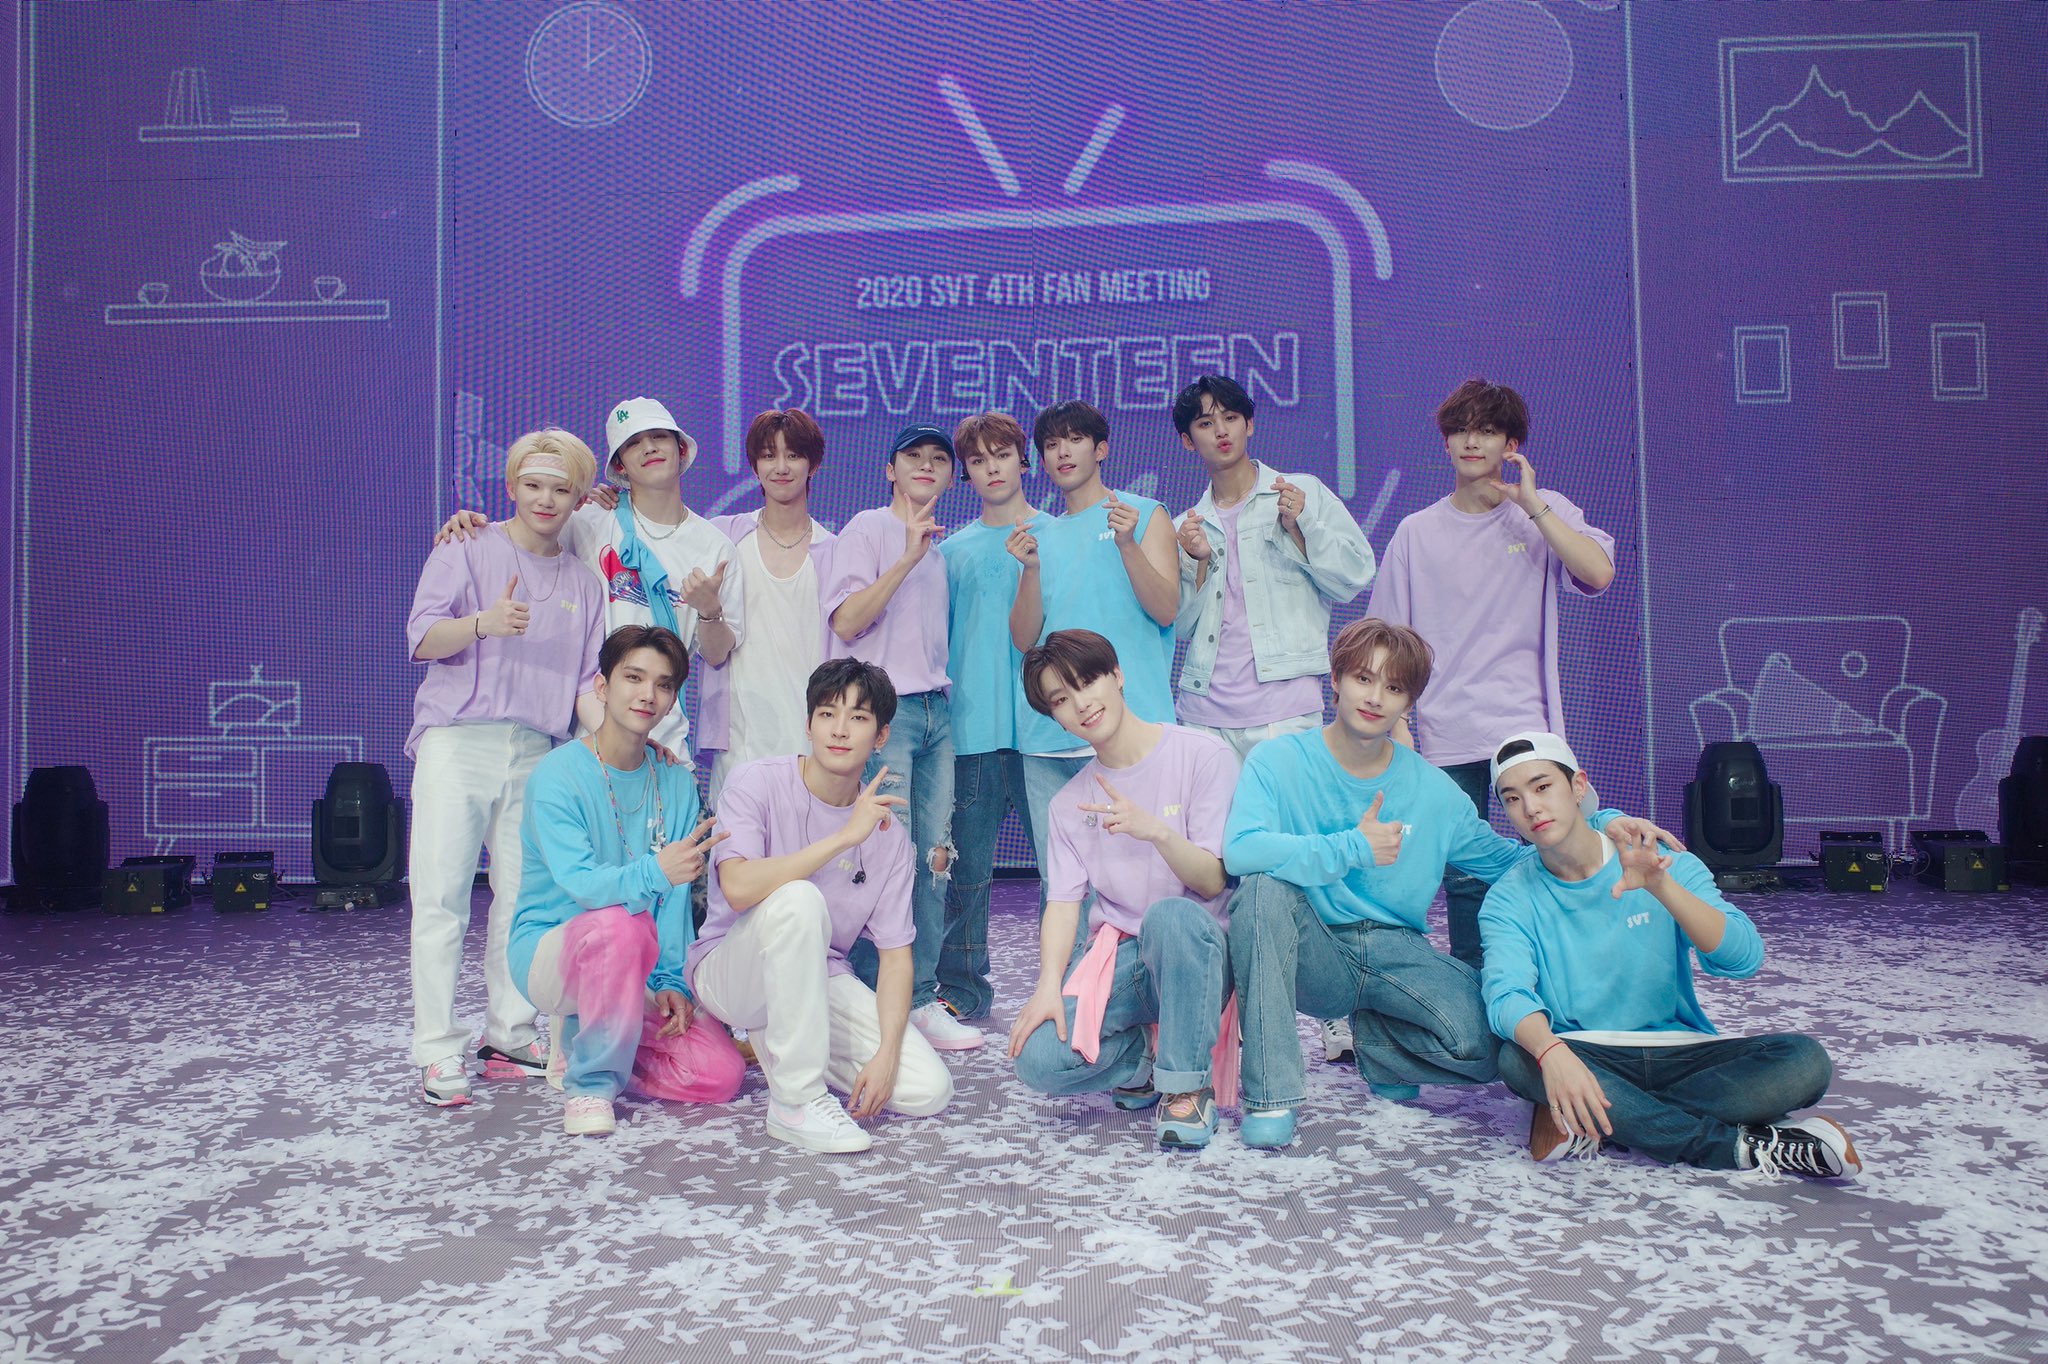 HD desktop wallpaper featuring the group Seventeen in coordinating pastel outfits posing for a photo at their fan meeting event.